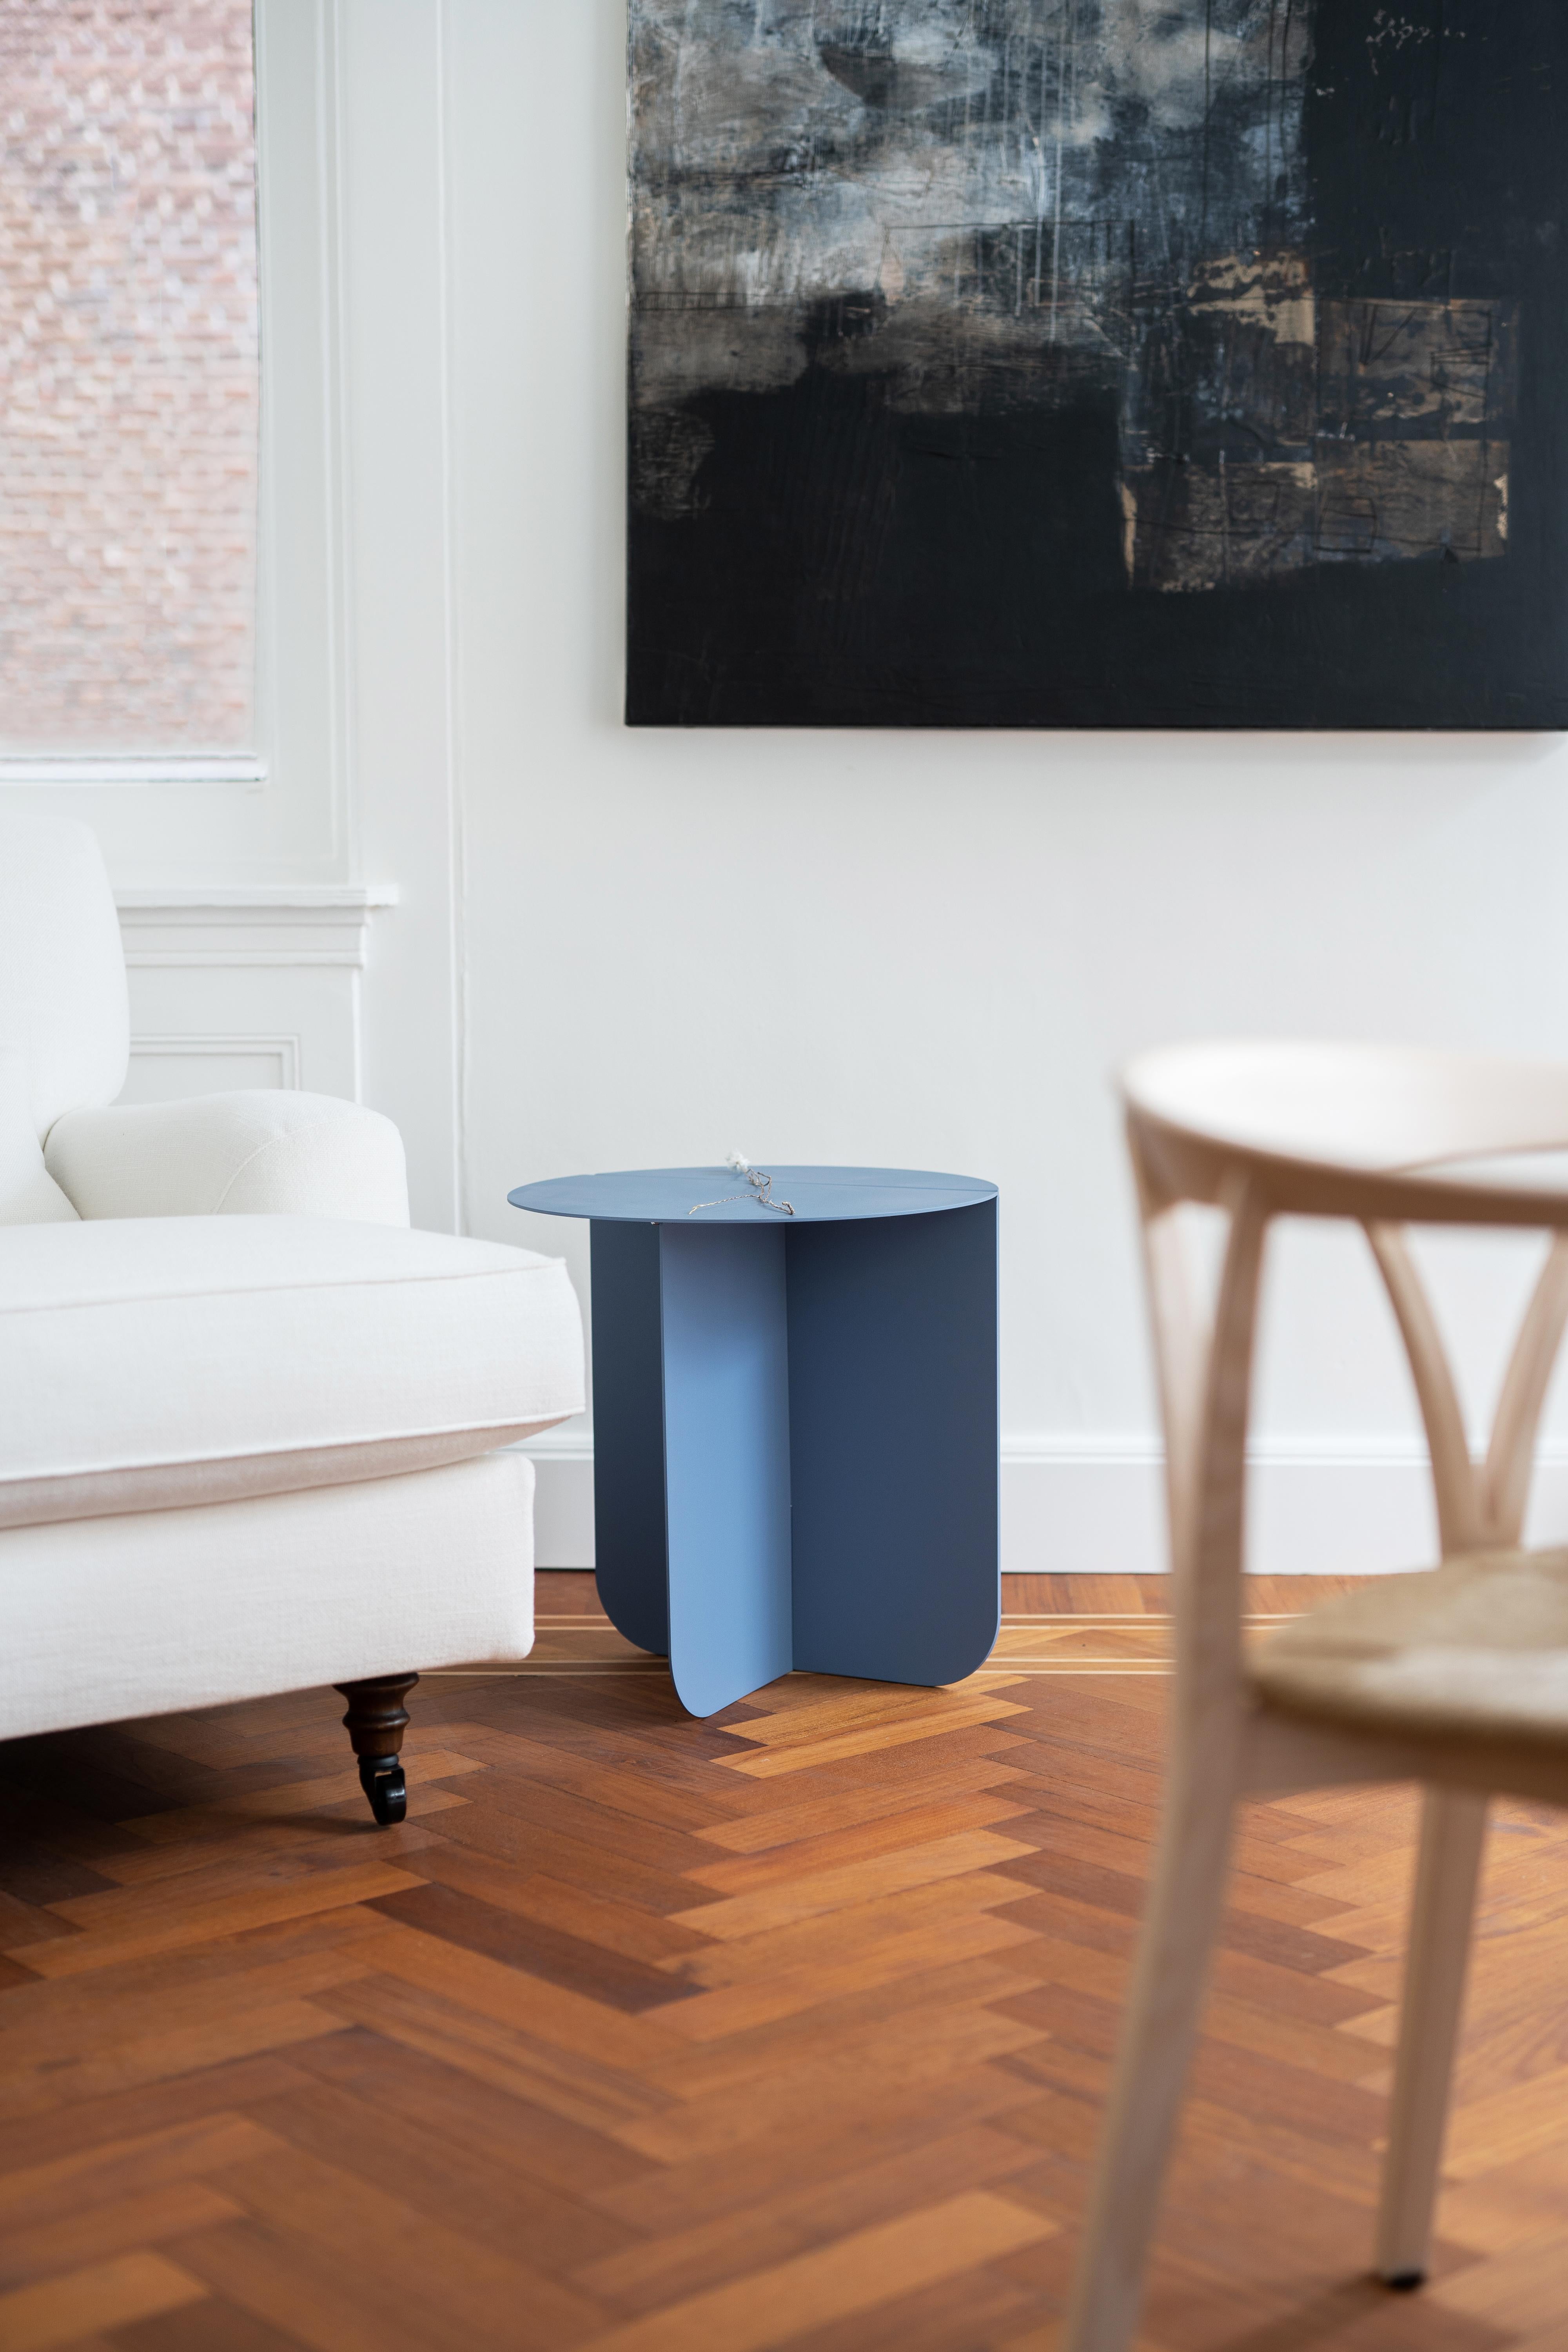 Powder-Coated Colour, a Modern Coffee / Side Table, Ral 1019 - Grey Beige, by Bas Vellekoop For Sale